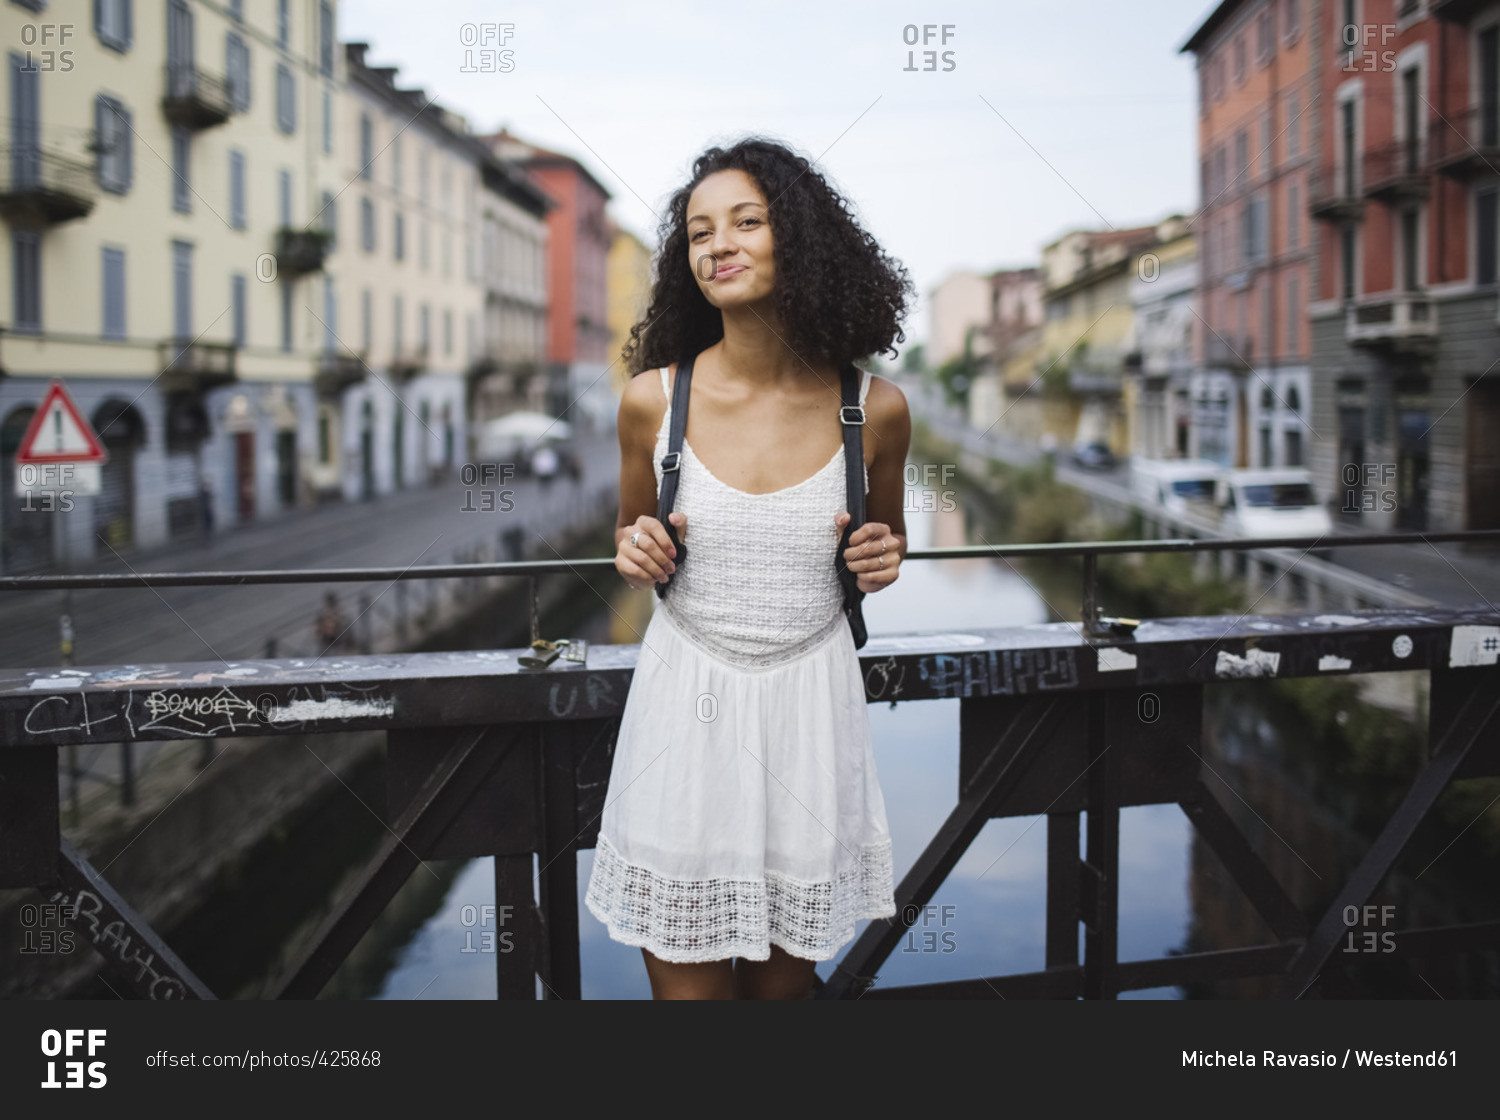 Italy- Milan- portrait of smiling young woman with backpack wearing white summer dress standing on a bridge